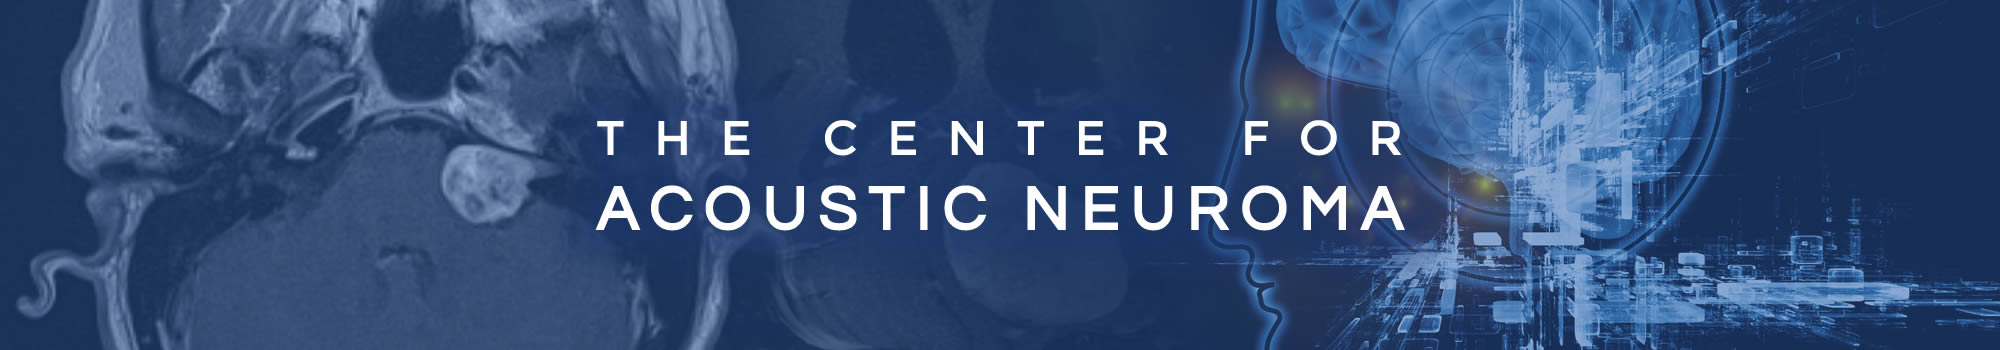 The Center for Acoustic Neuroma Dallas, Texas